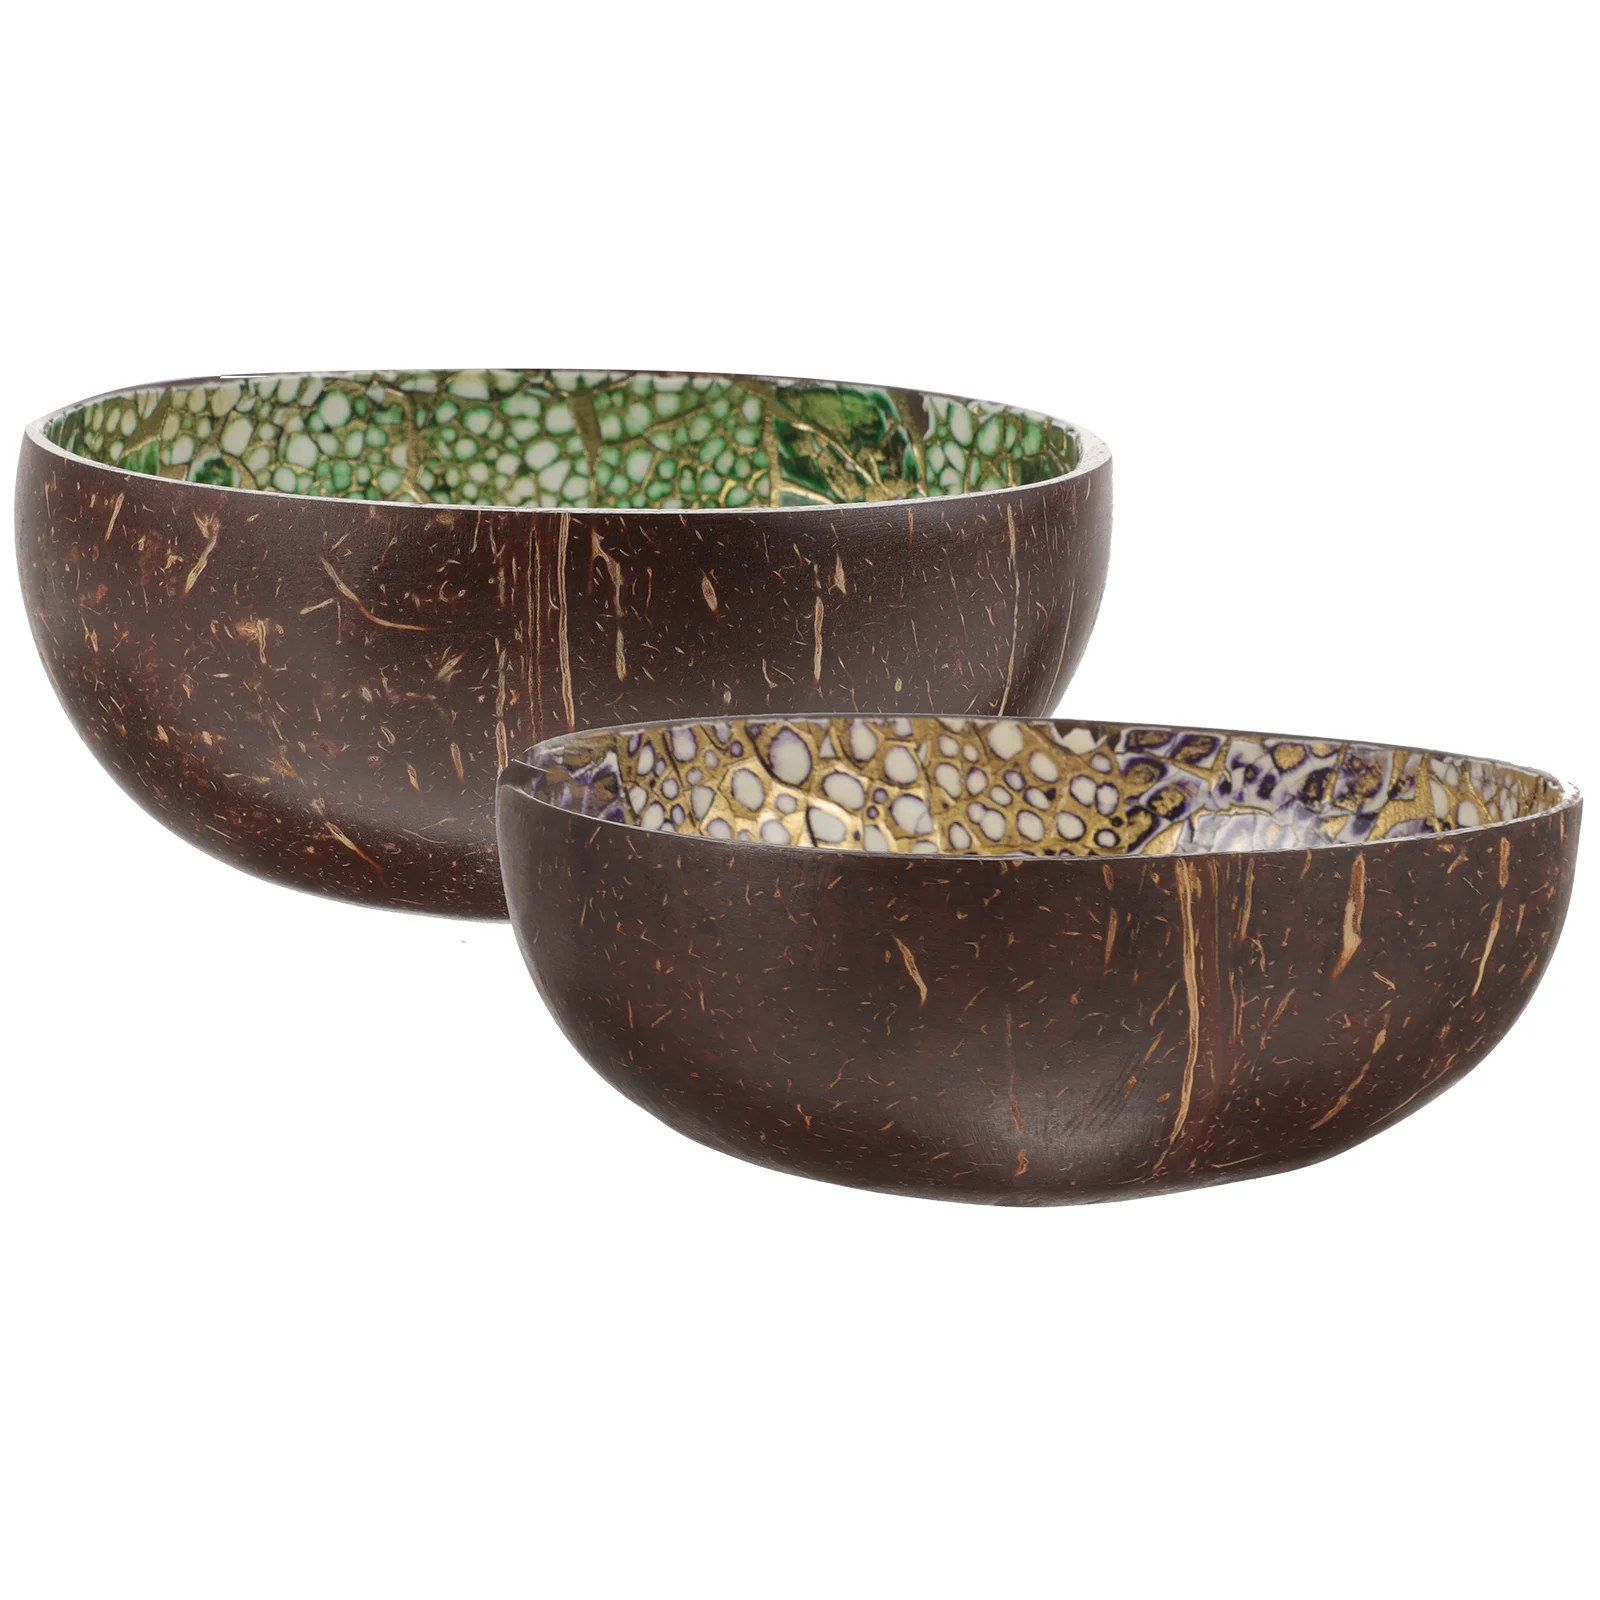 

2 Pcs Natural Coconut Shell Bowl Coconuts Decor Household Fruit Wooden Home Supply Food Bowls Salad